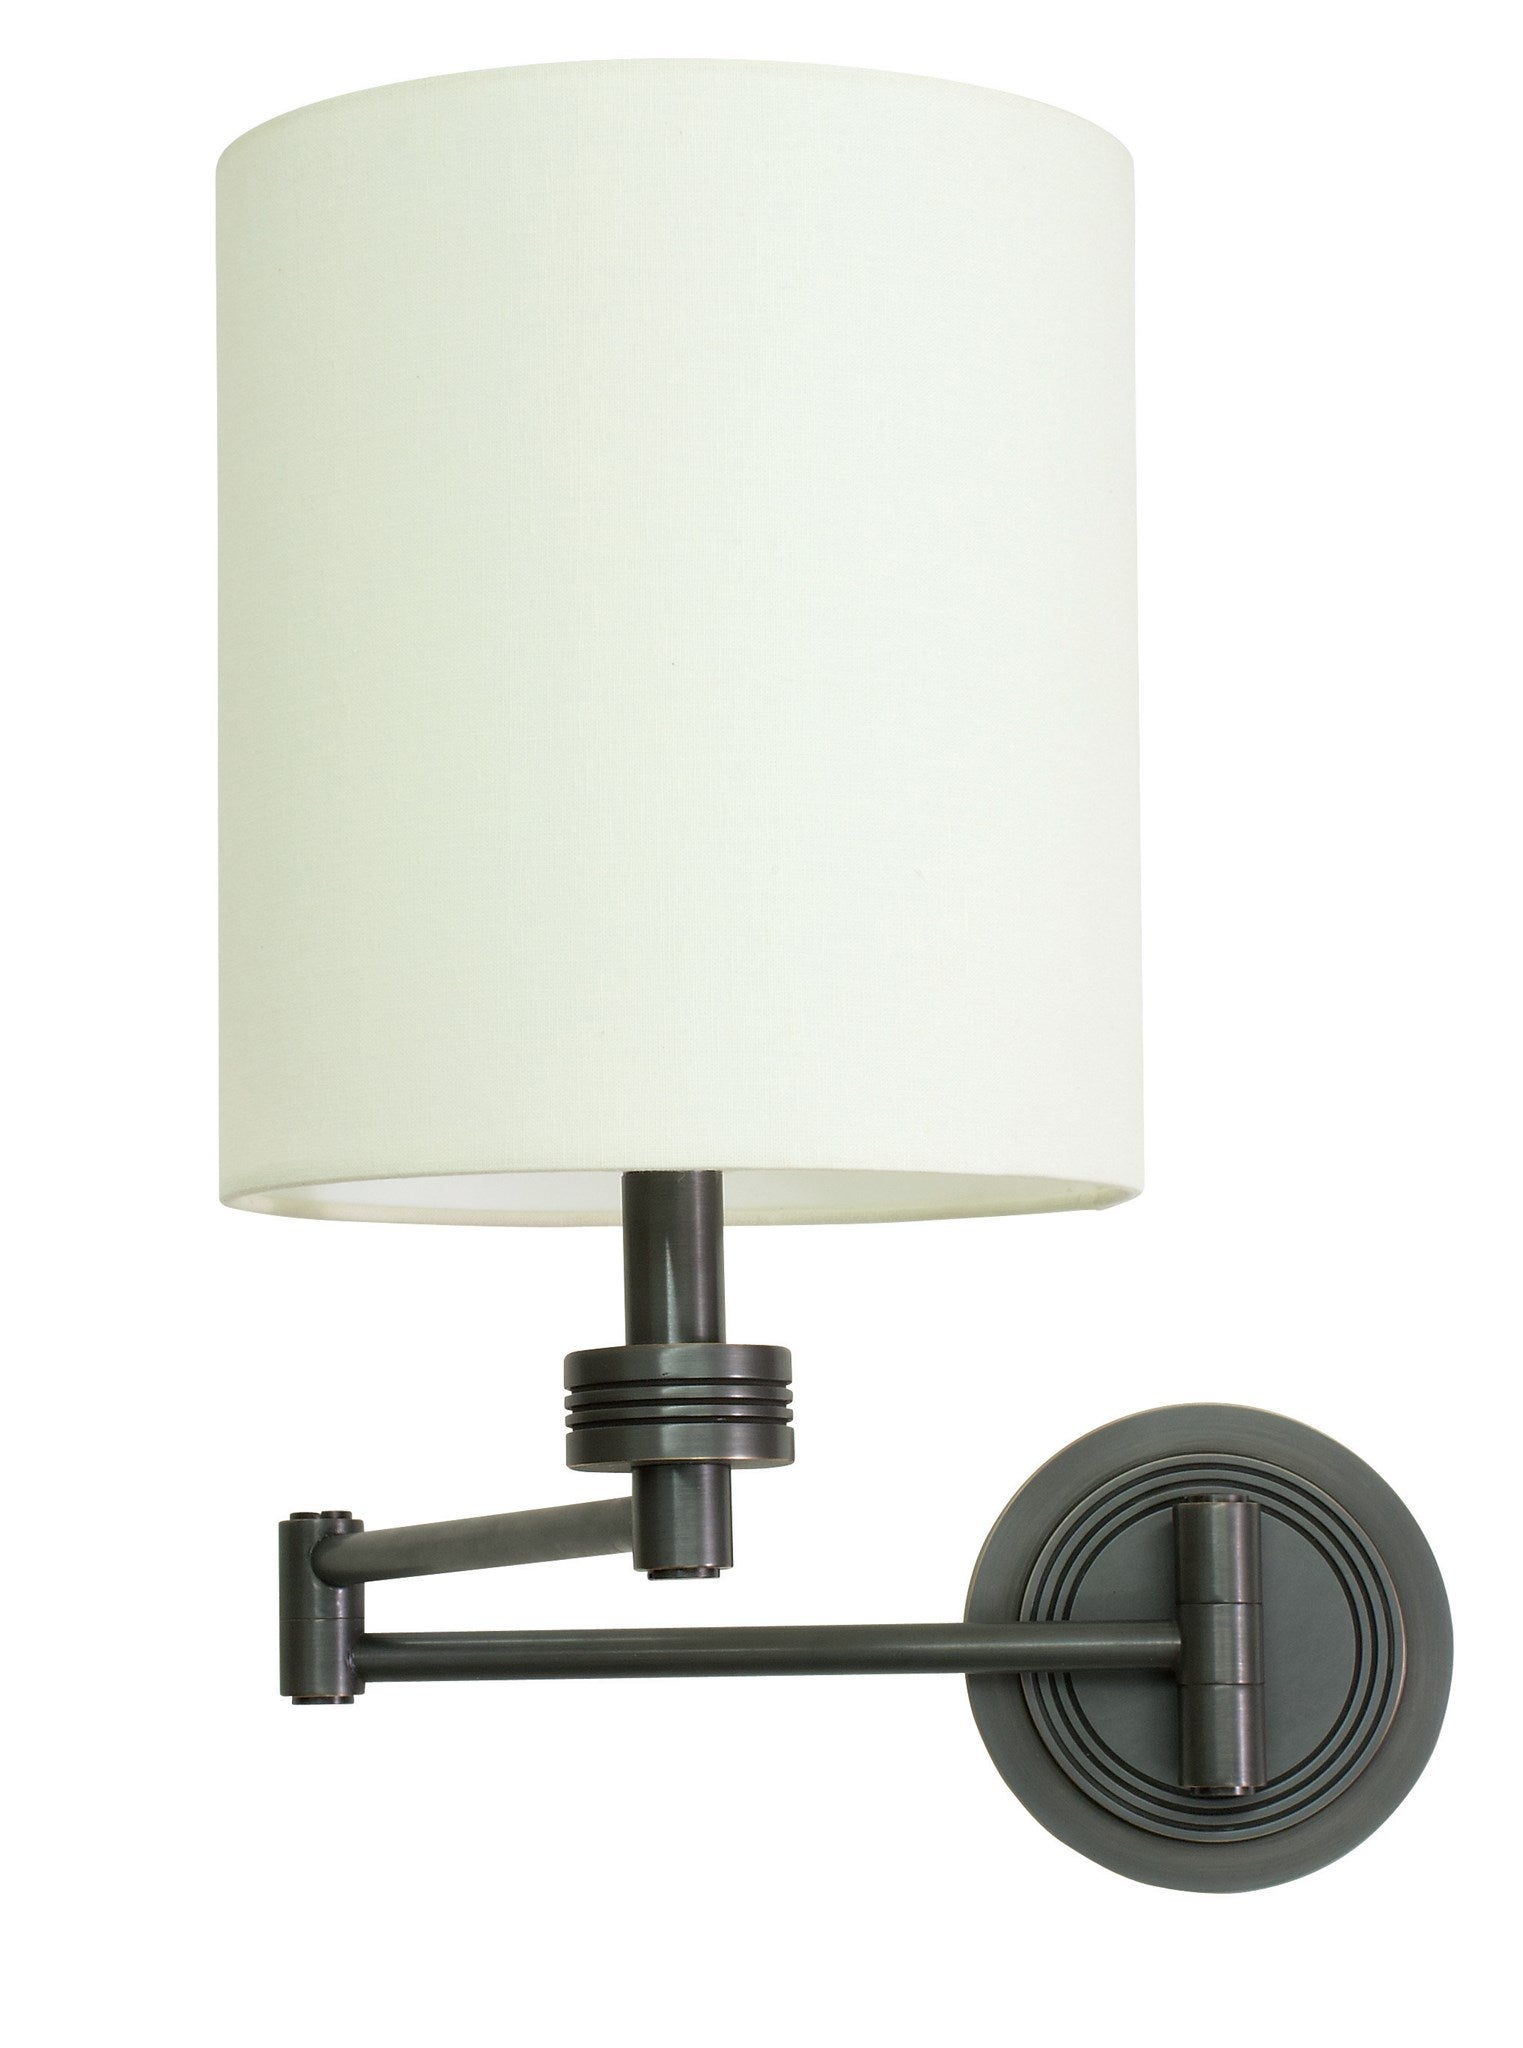 House of Troy Swing Arm Wall Lamp in Polished Nickel WS776-PN 